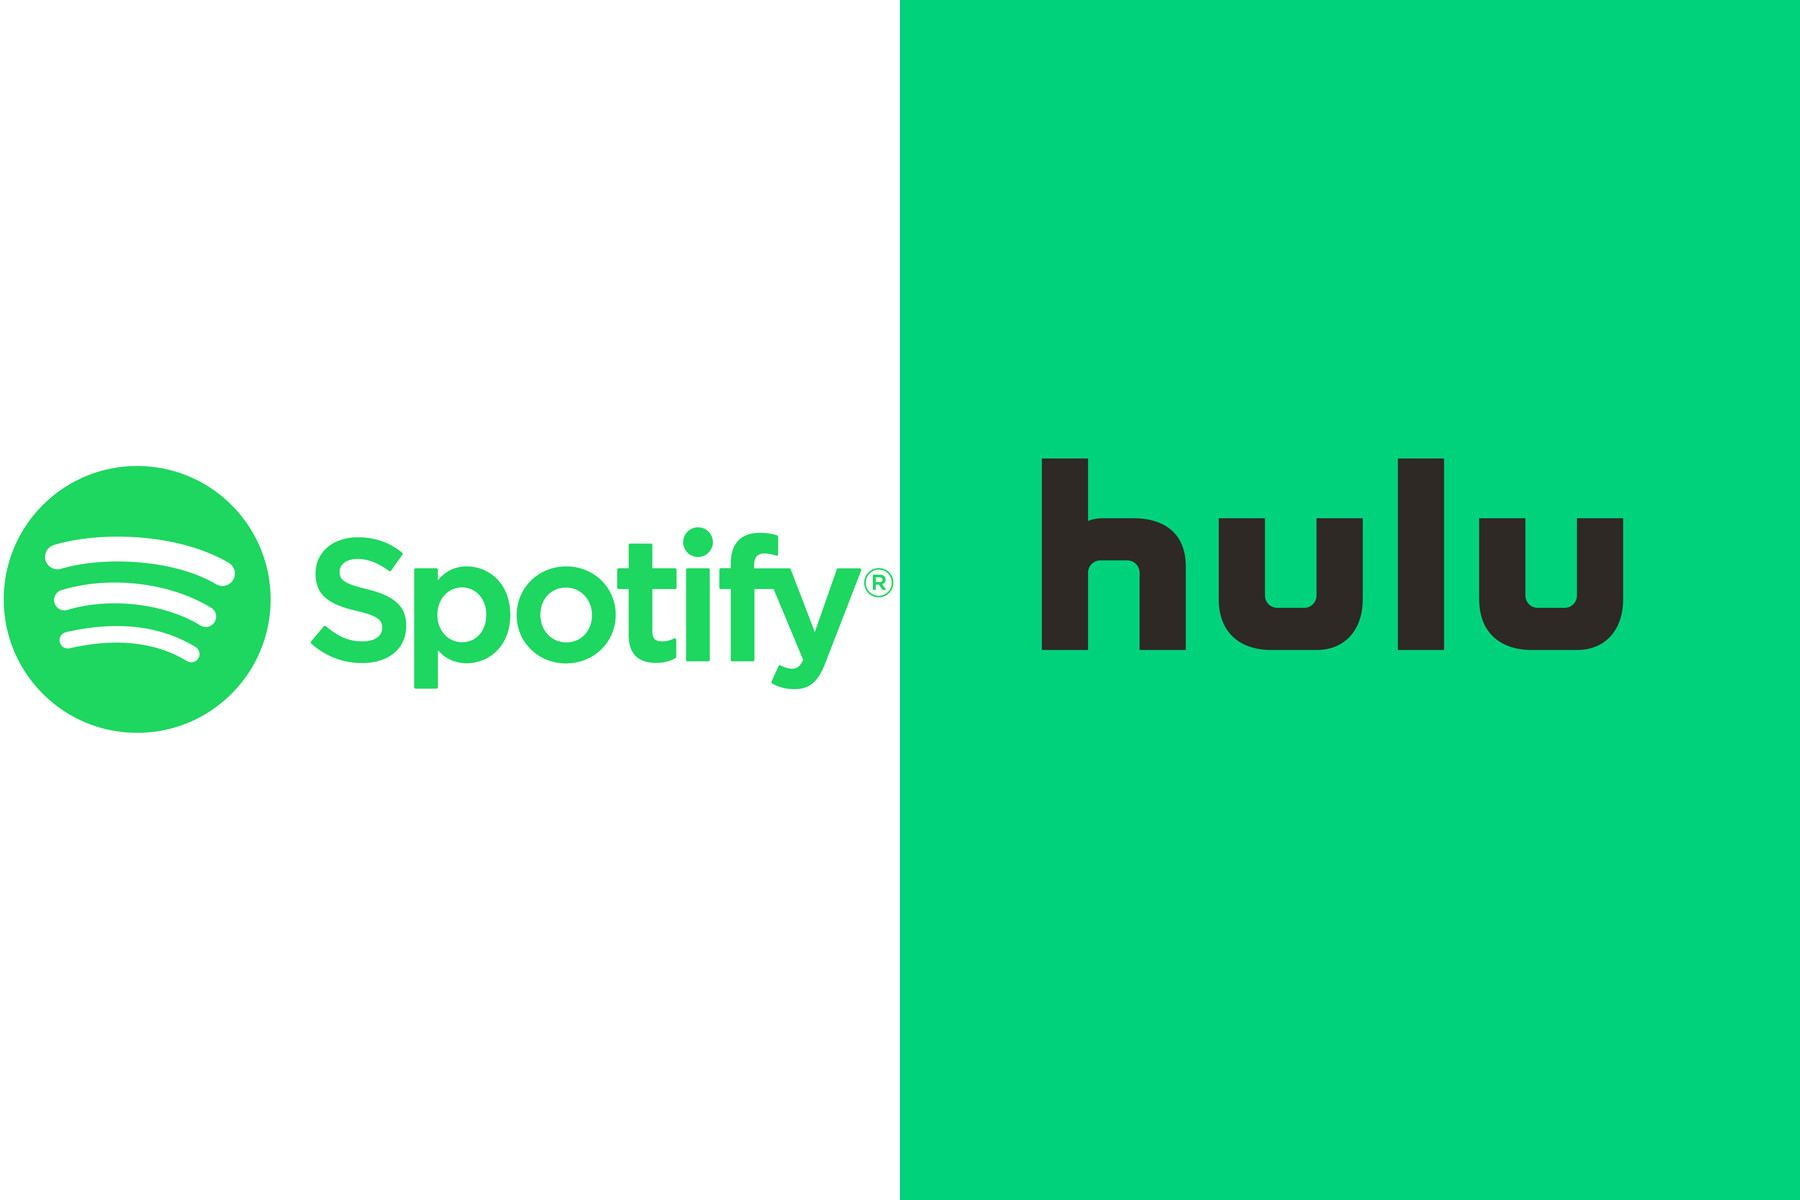 How to get hulu free with spotify